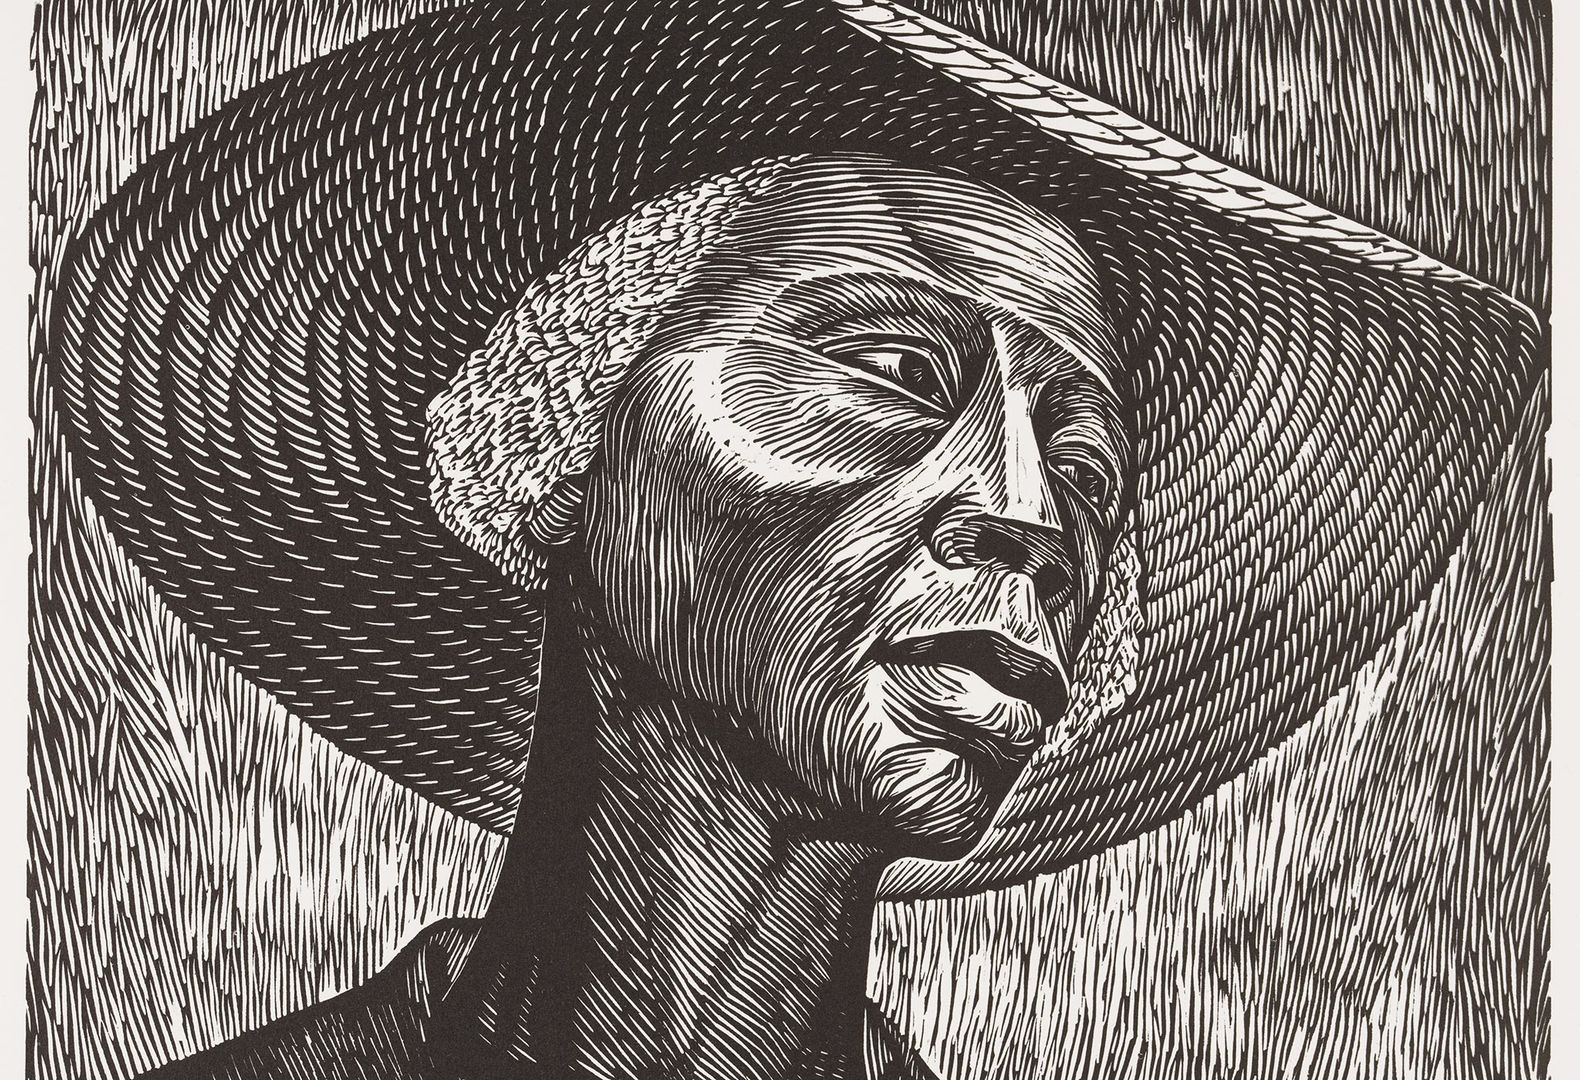 Print rendered in visible uniform lines of a 2/3 bust view of a dark-skinned mature woman looking to her left in a wide brim hat. The portrait is rendered in black and white.